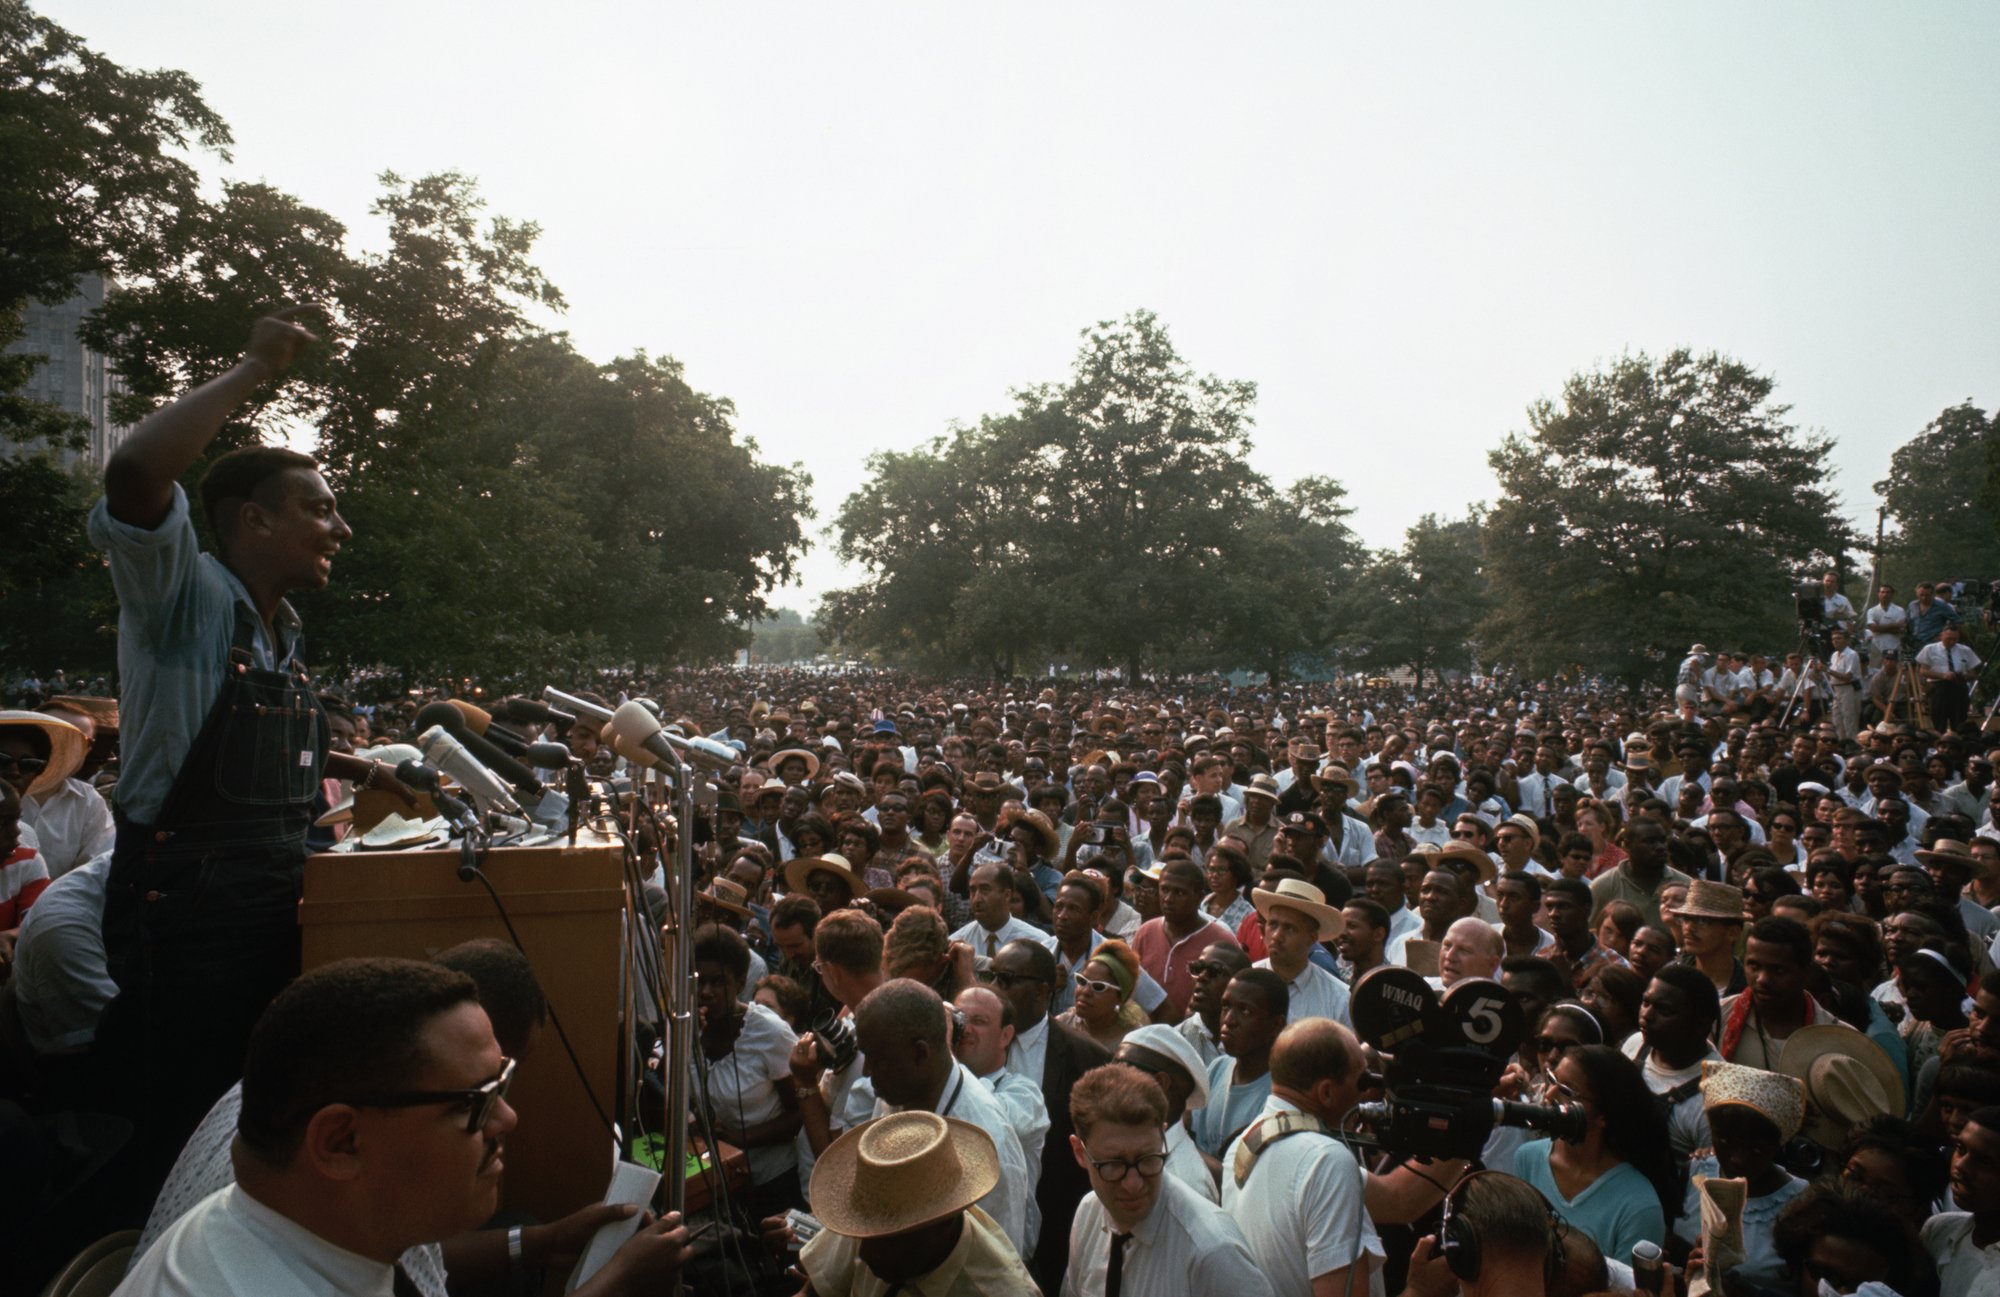 A029_1966-06-16_STOKELY SPEAKING TO LARGE CROWD_BLACK POWER SPEECH_MARCH AGAINST FEAR.jpeg